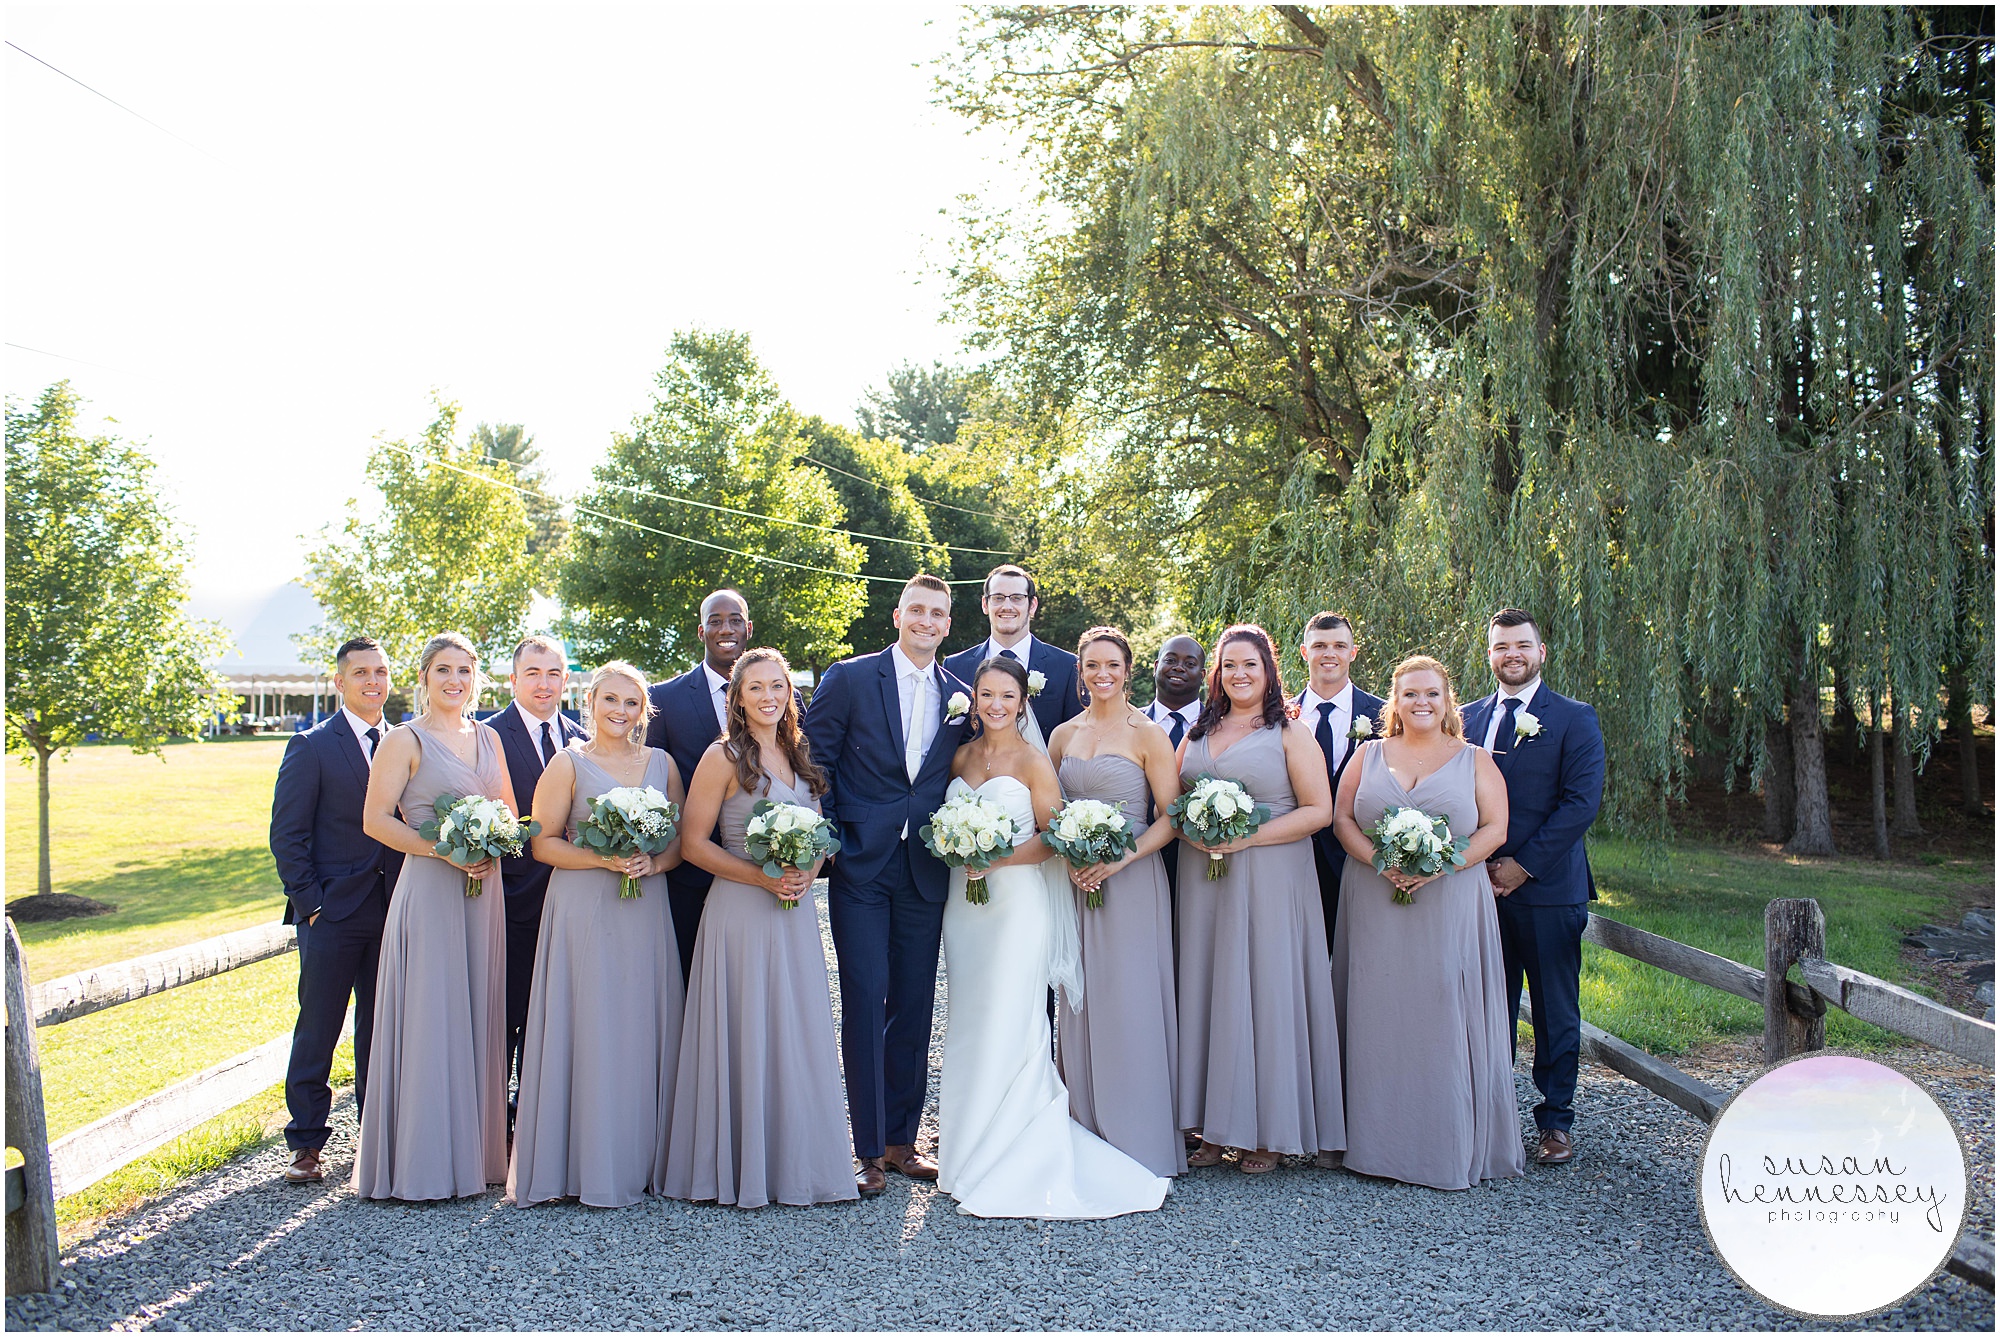 Bridal party on the grounds of wedding venue in New Jersey